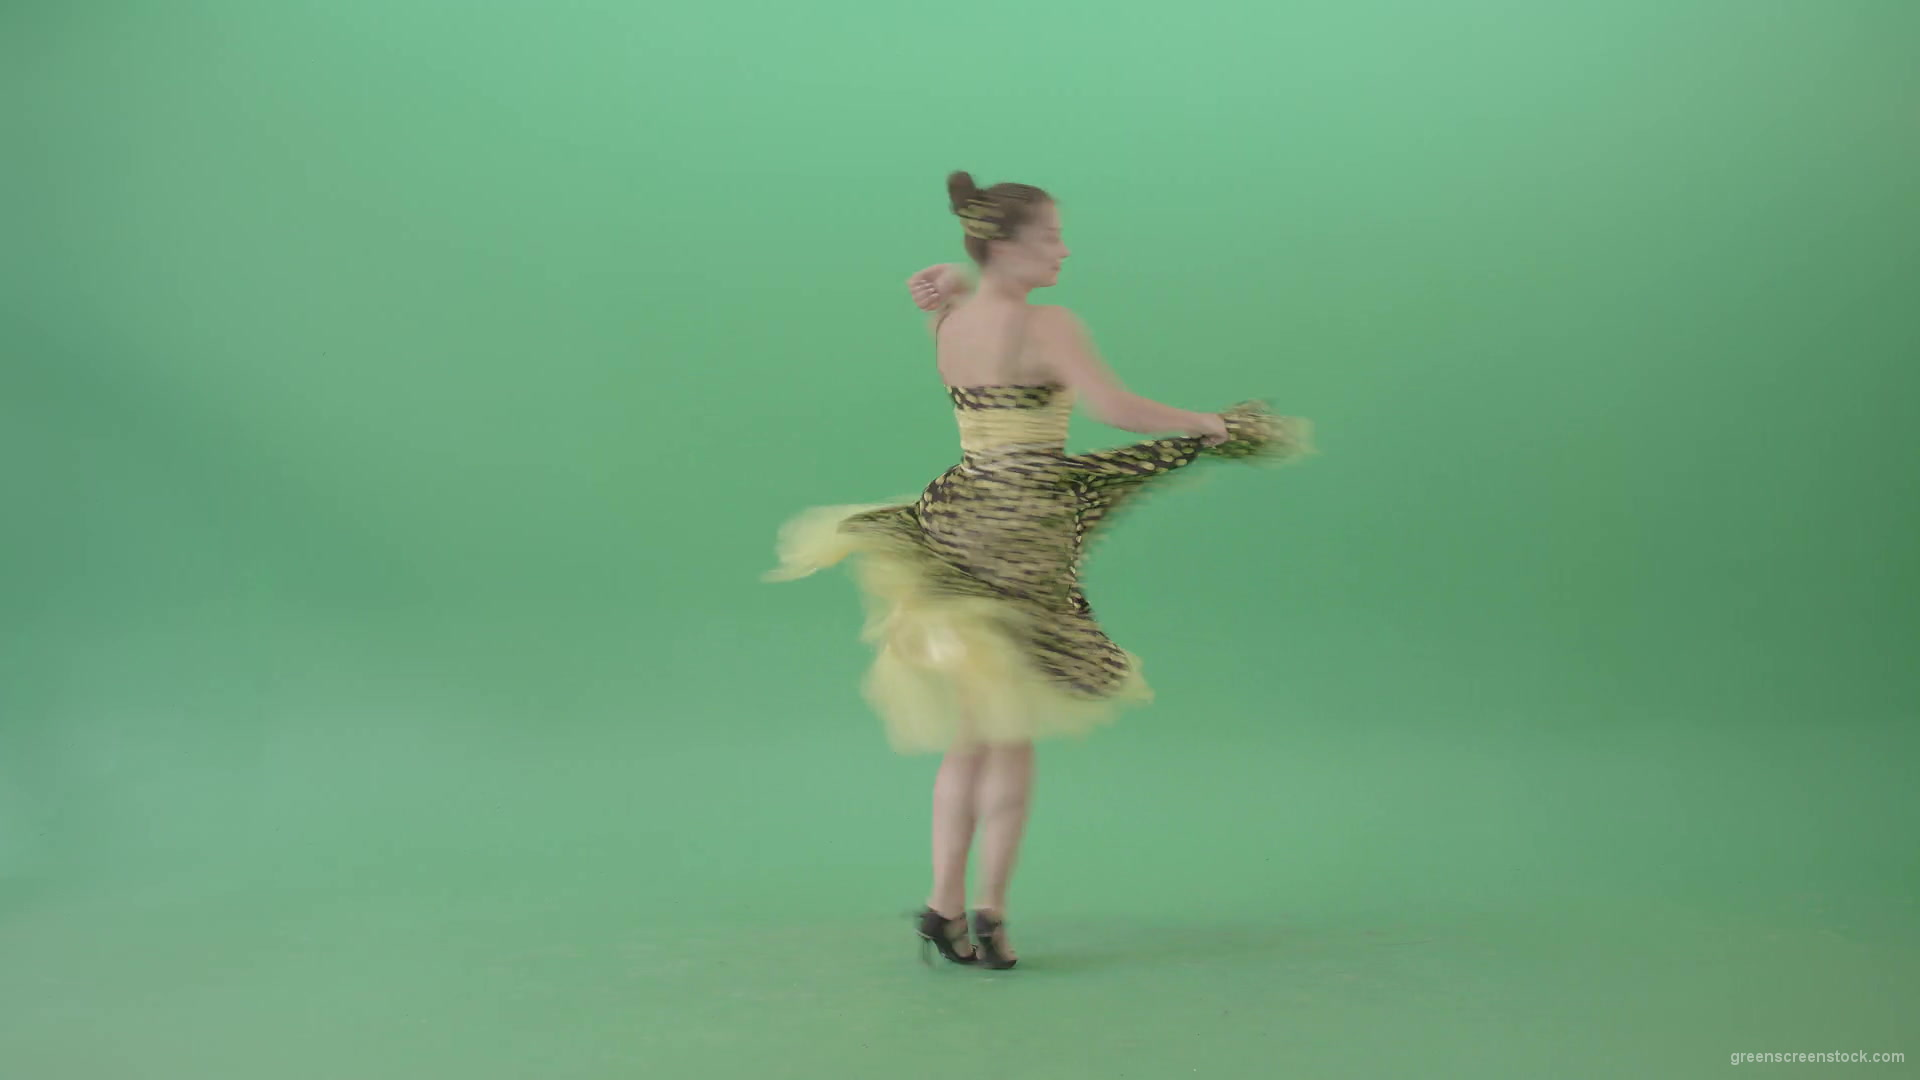 Beautiful-Woman-dancing-Boogie-woogie-and-jumping-in-Jazz-dance-isolated-on-Green-Screen-4K-Video-Footage-1920_007 Green Screen Stock